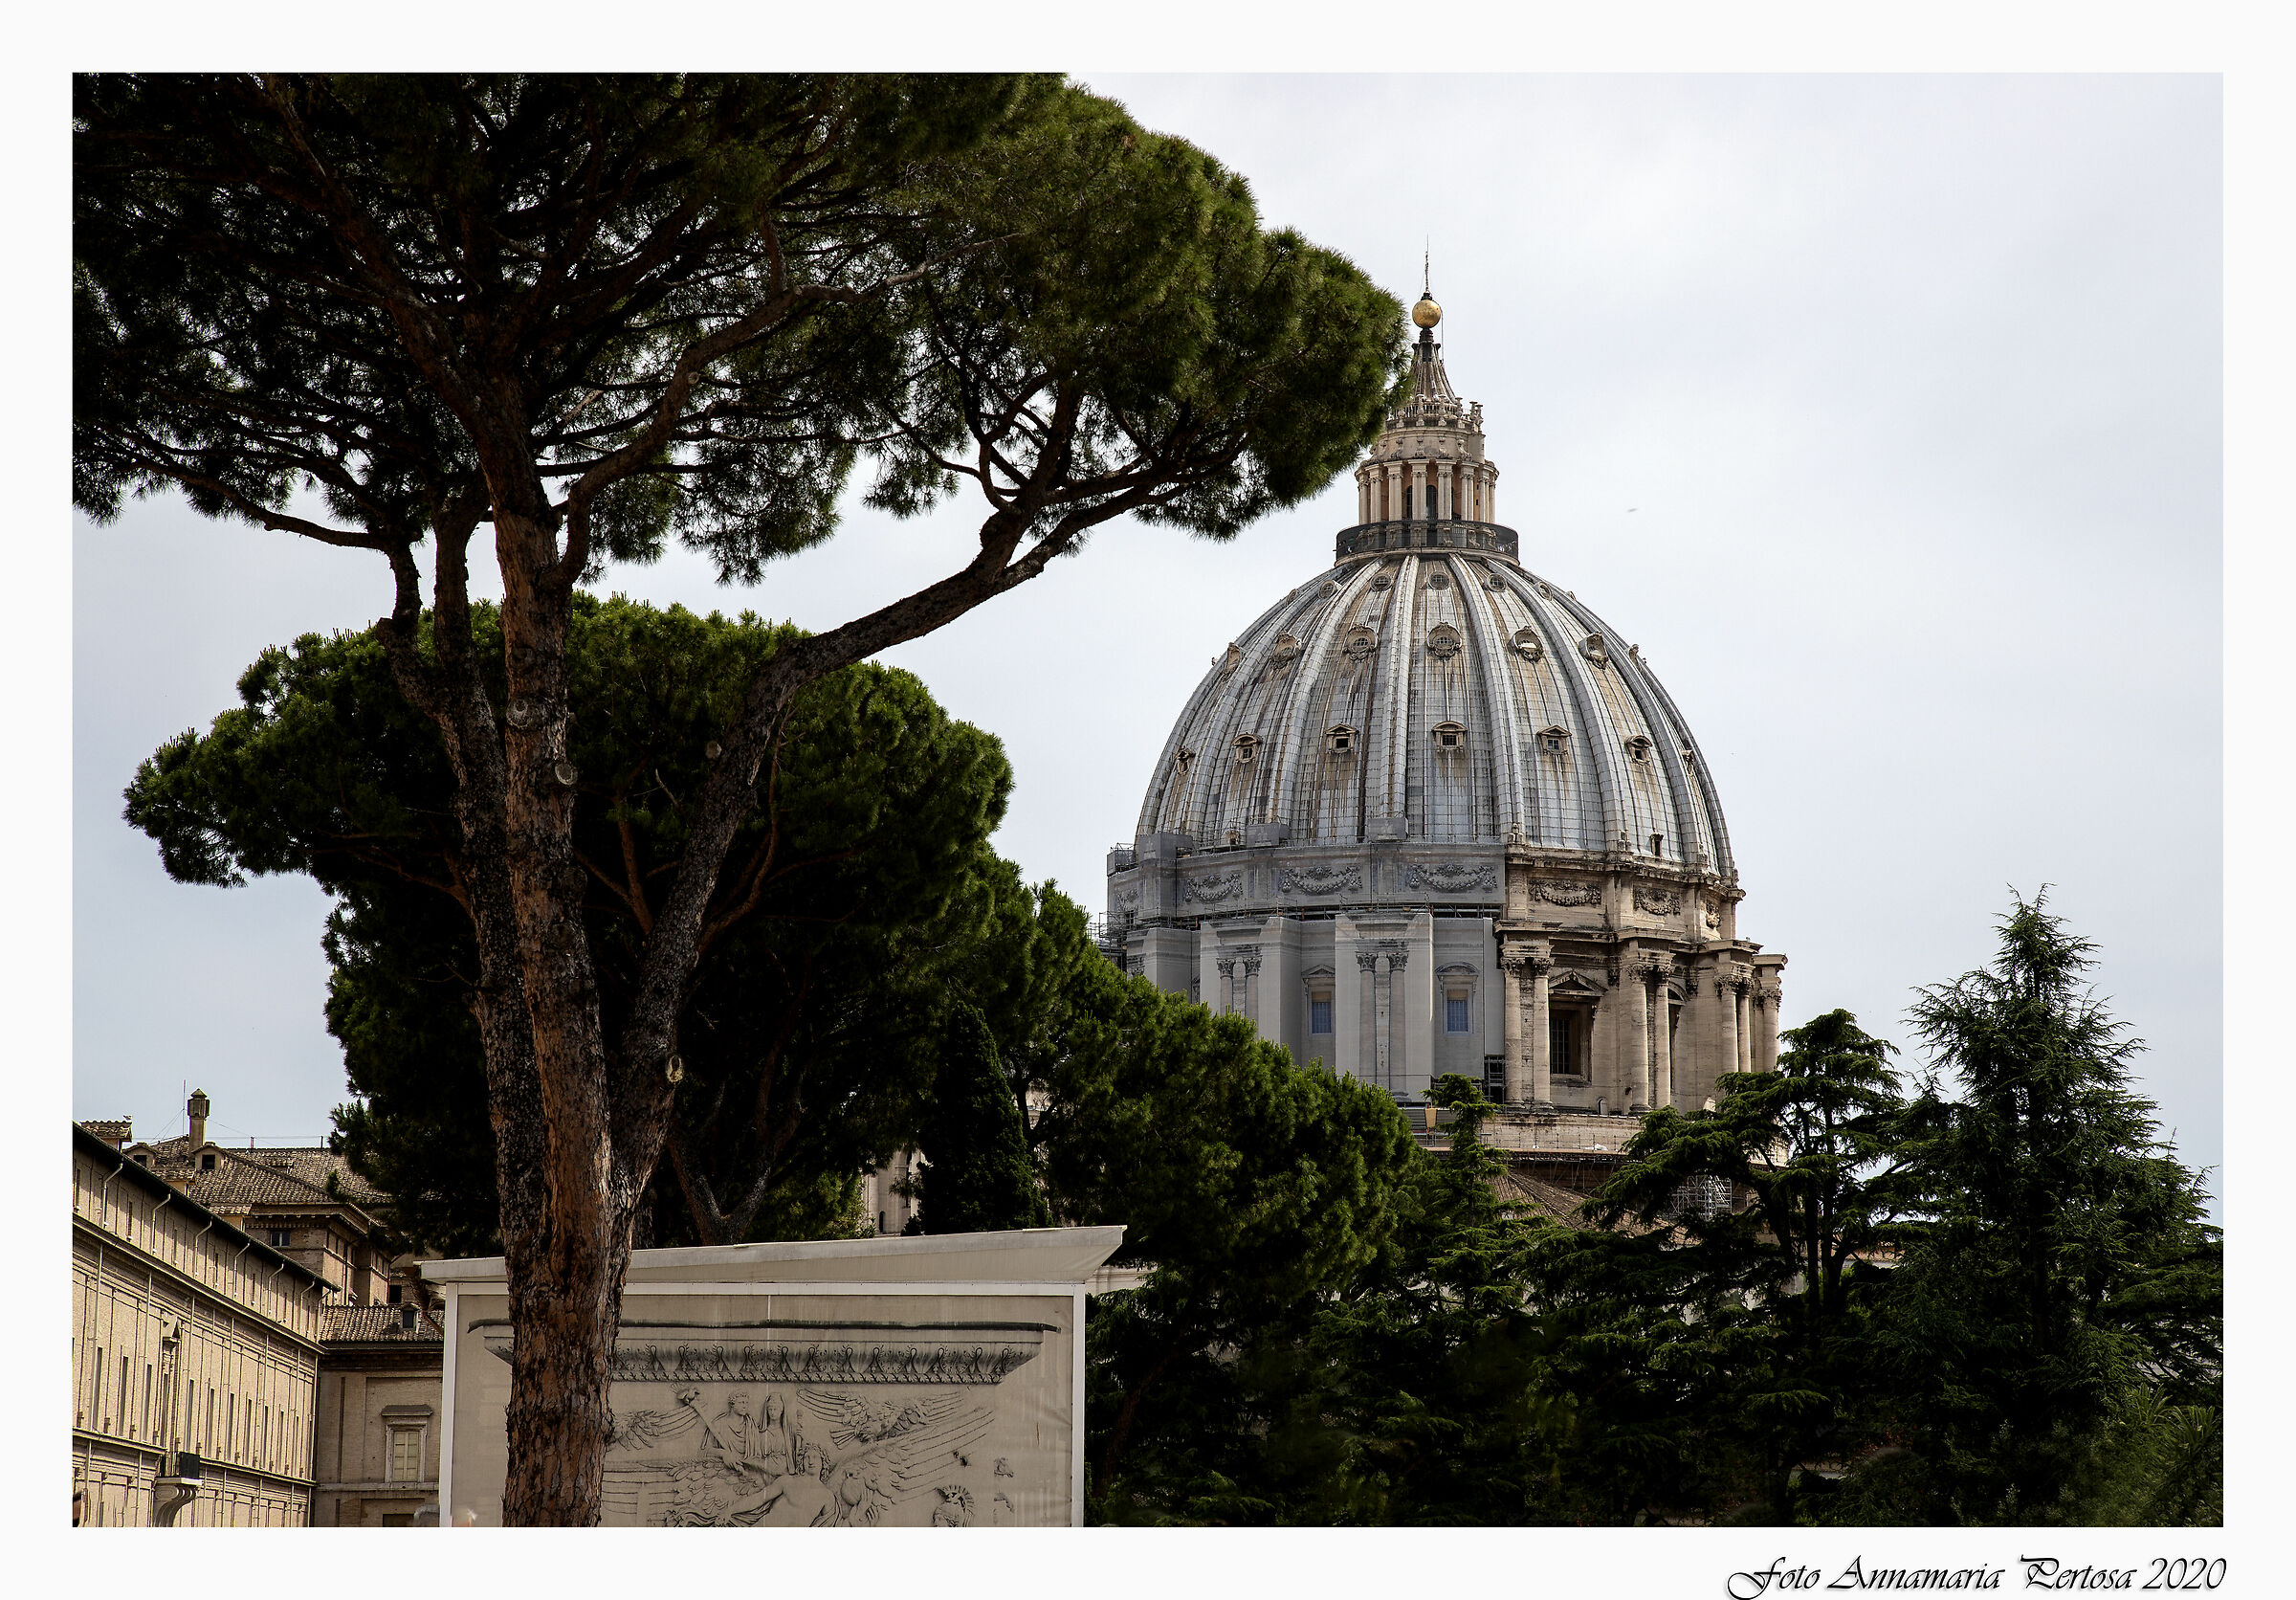 The Holiness and Majesty of the Dome...